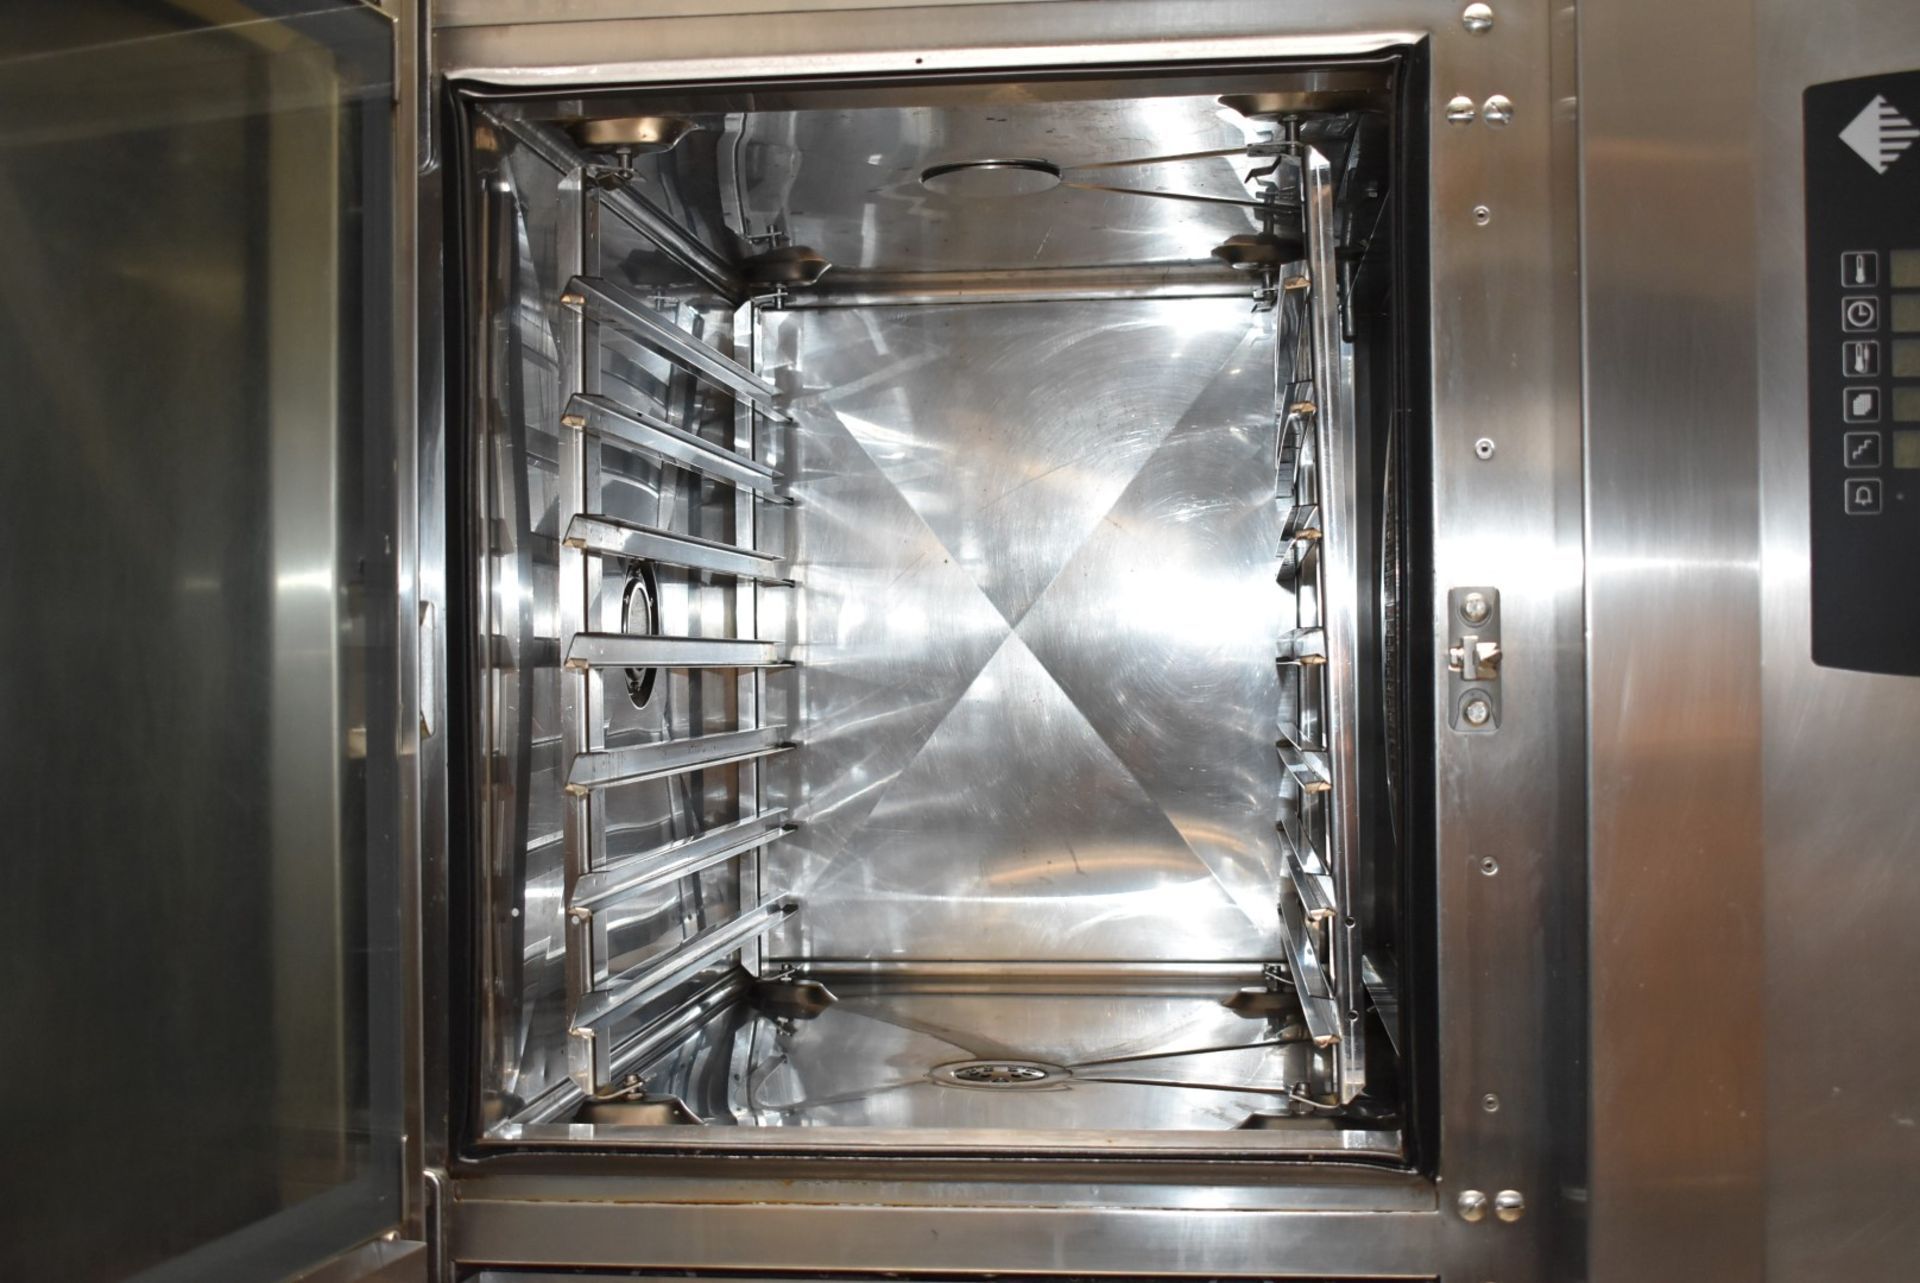 1 x Houno Double 6 Grid Stacked Combi Oven - Model: C 1.06 / CPE 1.06 - 3 Phase - Image 18 of 21